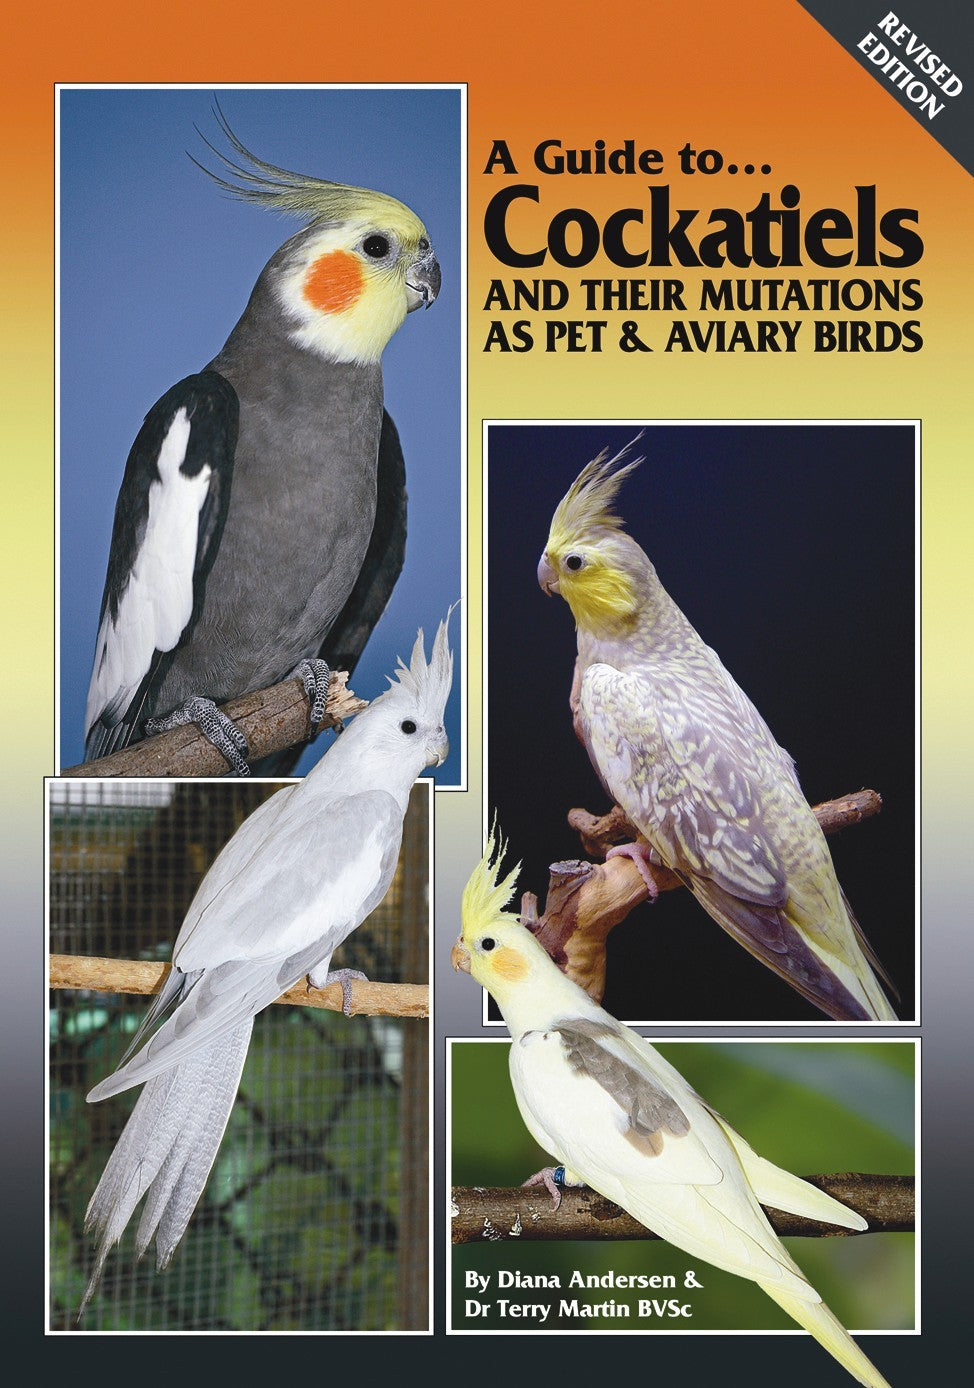 A Guide to Cockatiels and their Mutations as Pet & Aviary Birds—Revised Edition (Soft Cover)